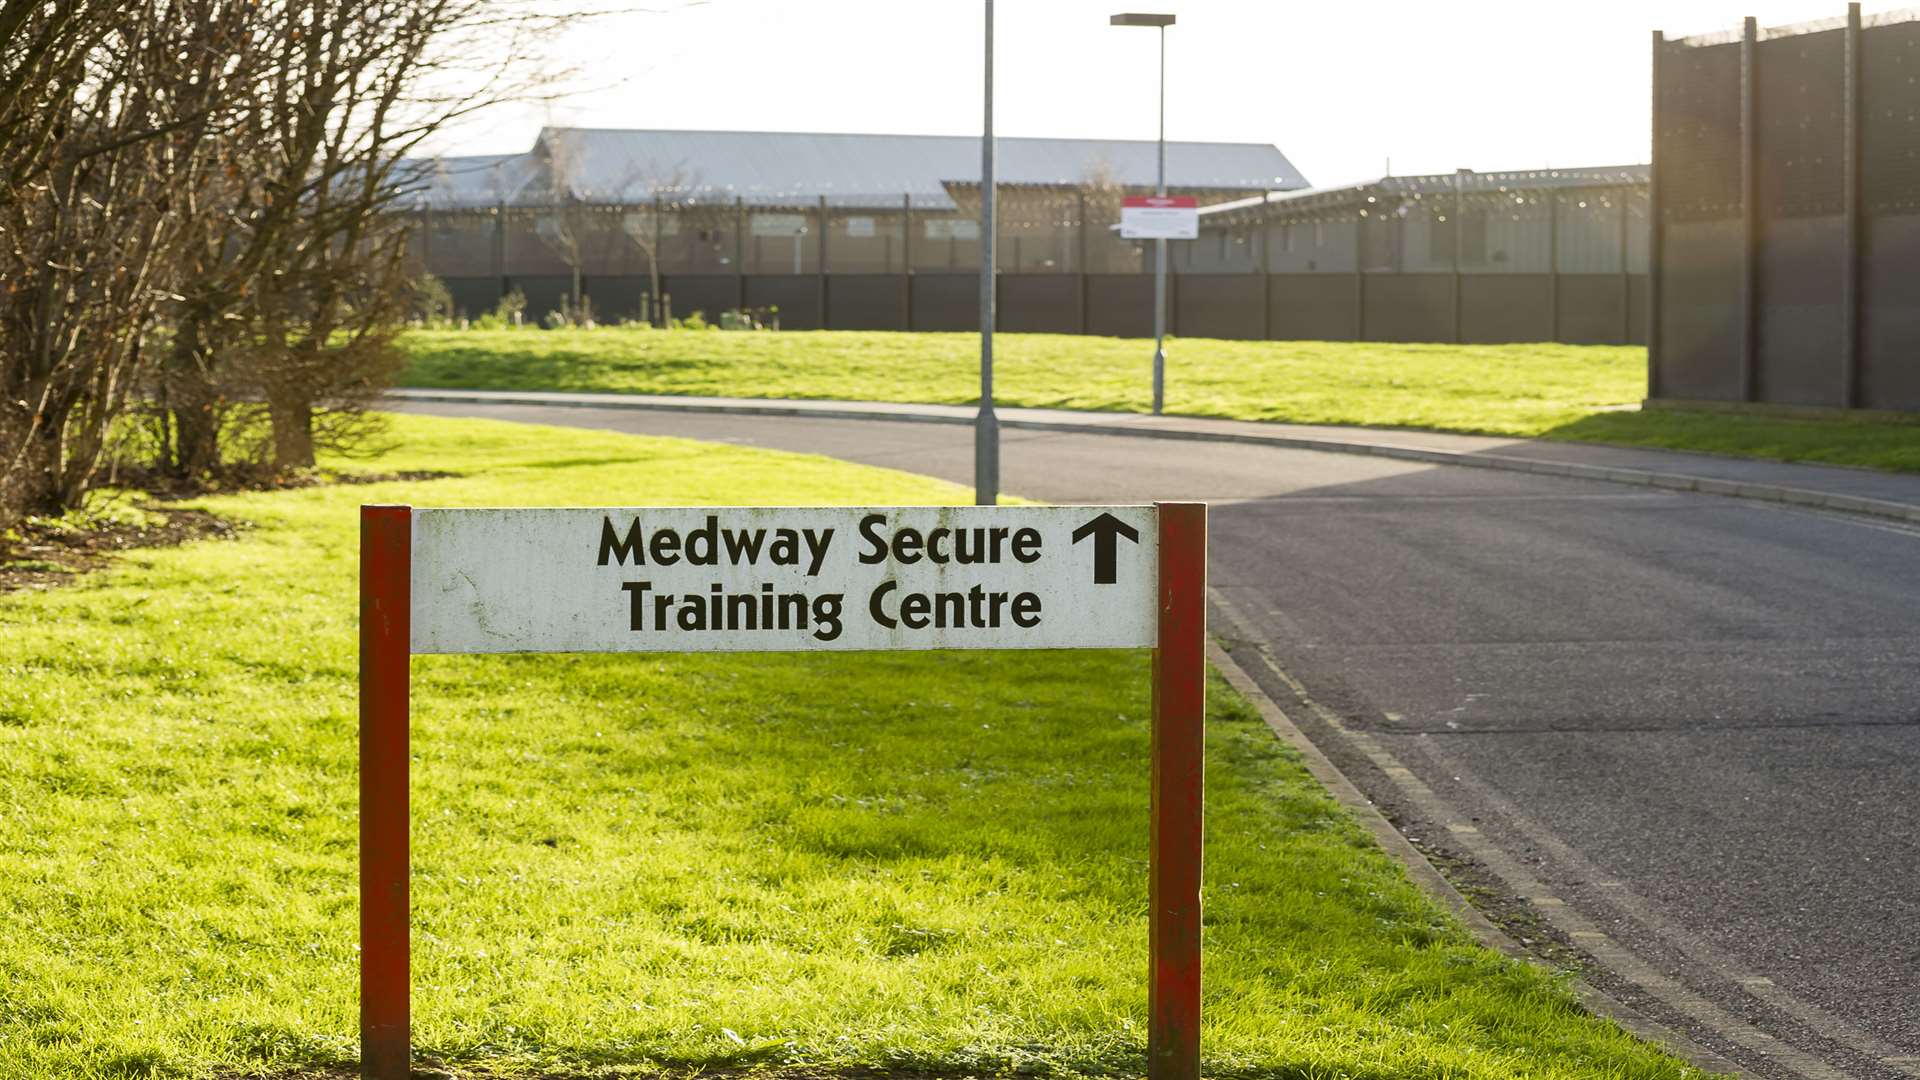 Medway Secure Training Centre.